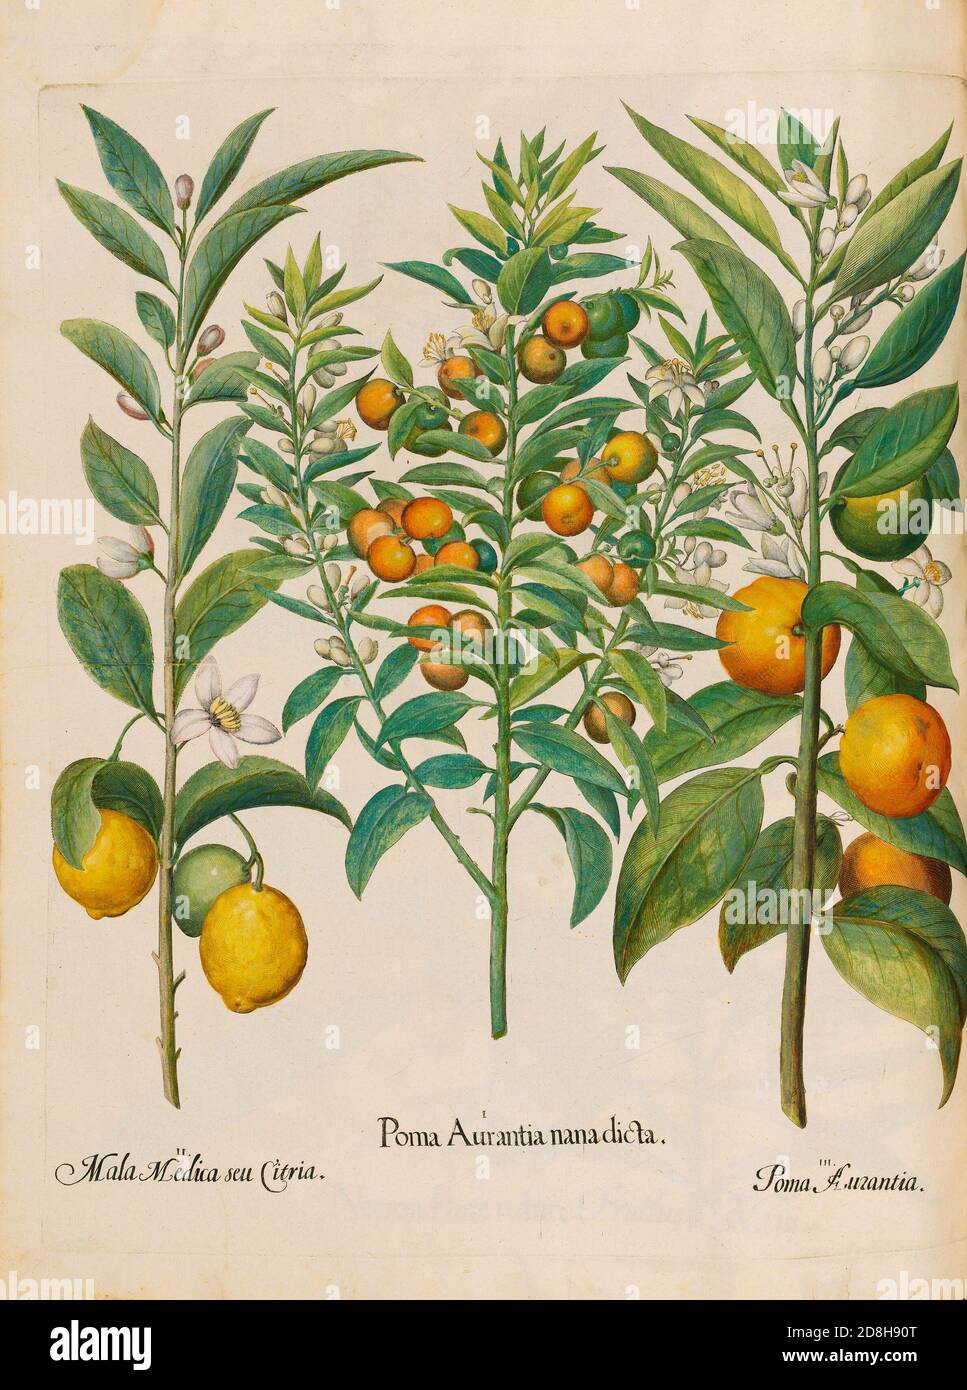 Stock from Oranges, a codex the by Photo Eystettensis, Mala The in produced - 1613 Besler Basil illustration Basilius Citria, by seu Alamy Besler Medica Hortus botanical